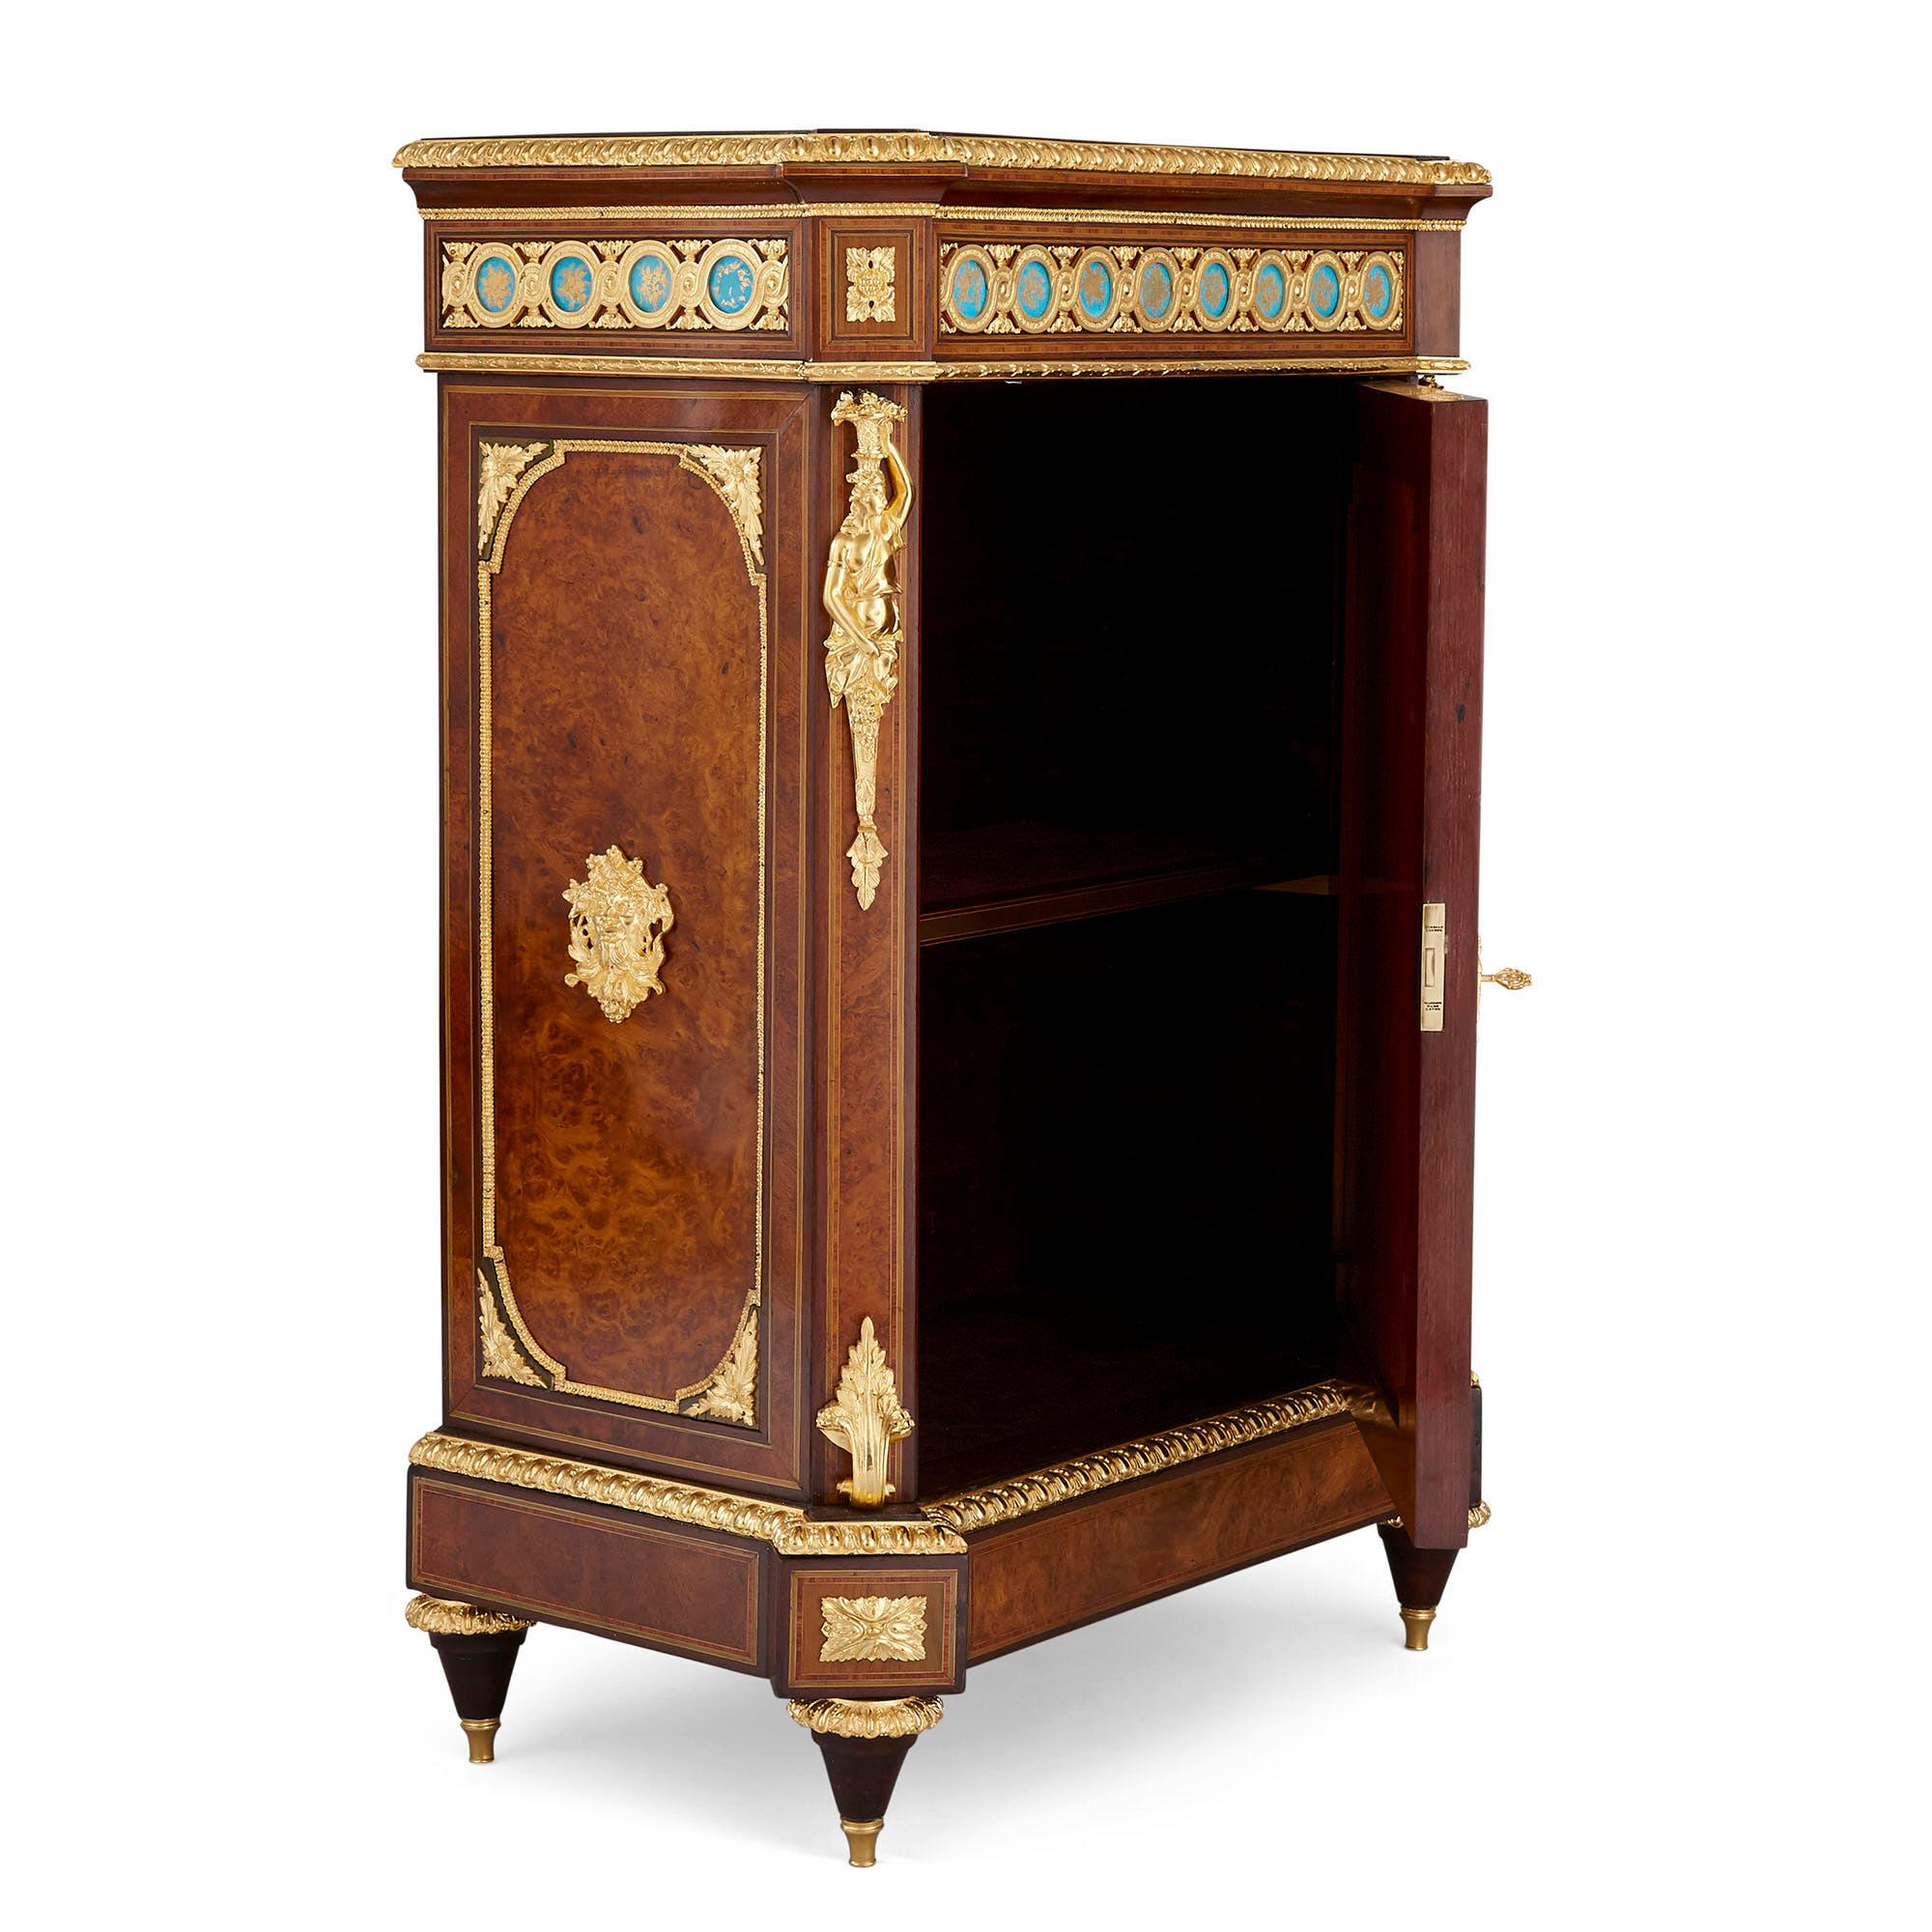 Pair of Victorian period amboyna cabinets with Sèvres style porcelain plaques
English, late 19th century
Dimensions: Height 108cm, width 77cm, depth 47cm

This unusual and superbly crafted pair of cabinets are made from ormolu-mounted amboyna